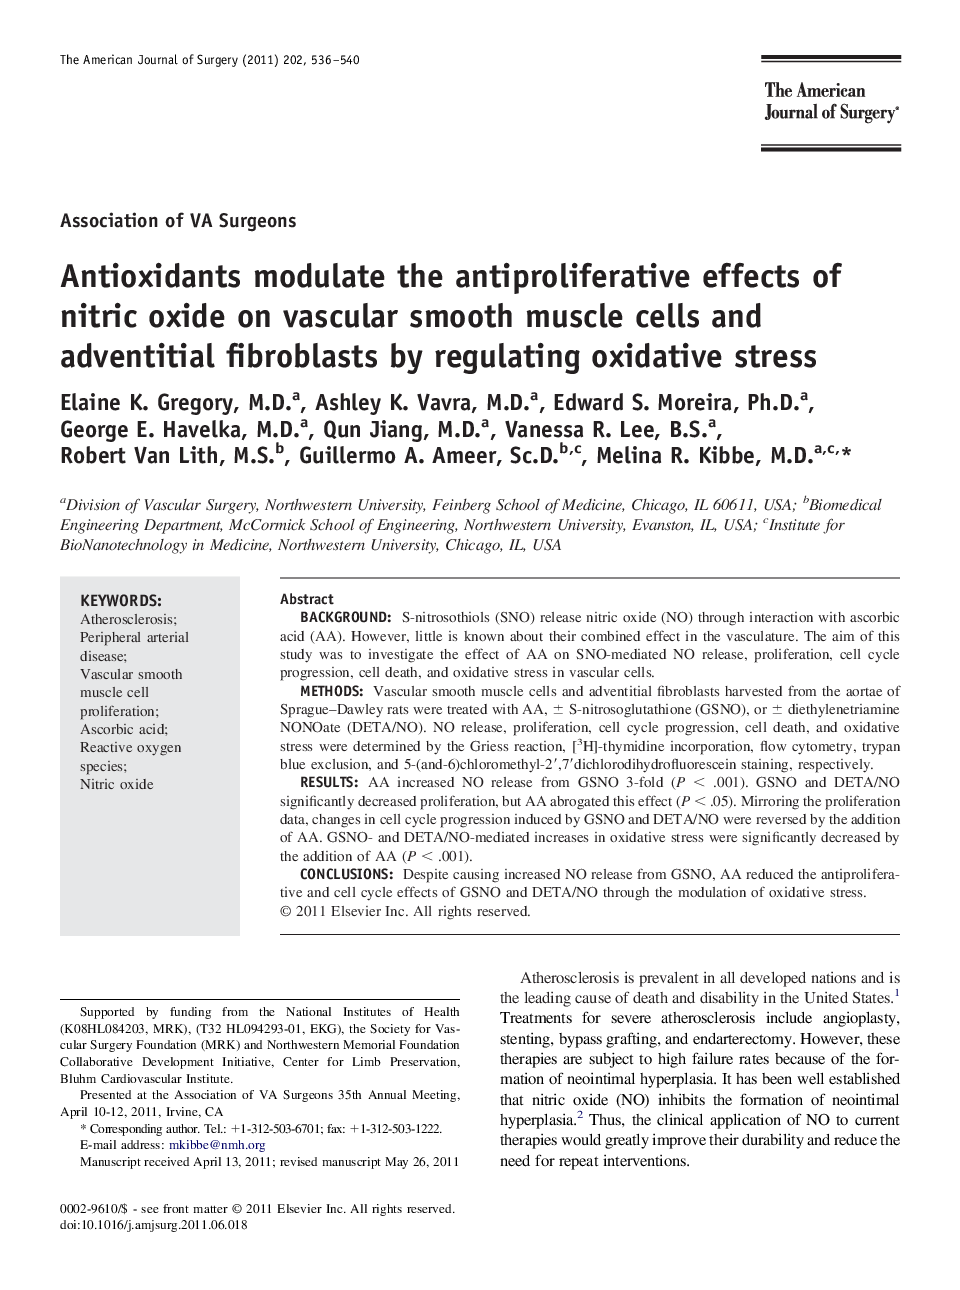 Antioxidants modulate the antiproliferative effects of nitric oxide on vascular smooth muscle cells and adventitial fibroblasts by regulating oxidative stress 